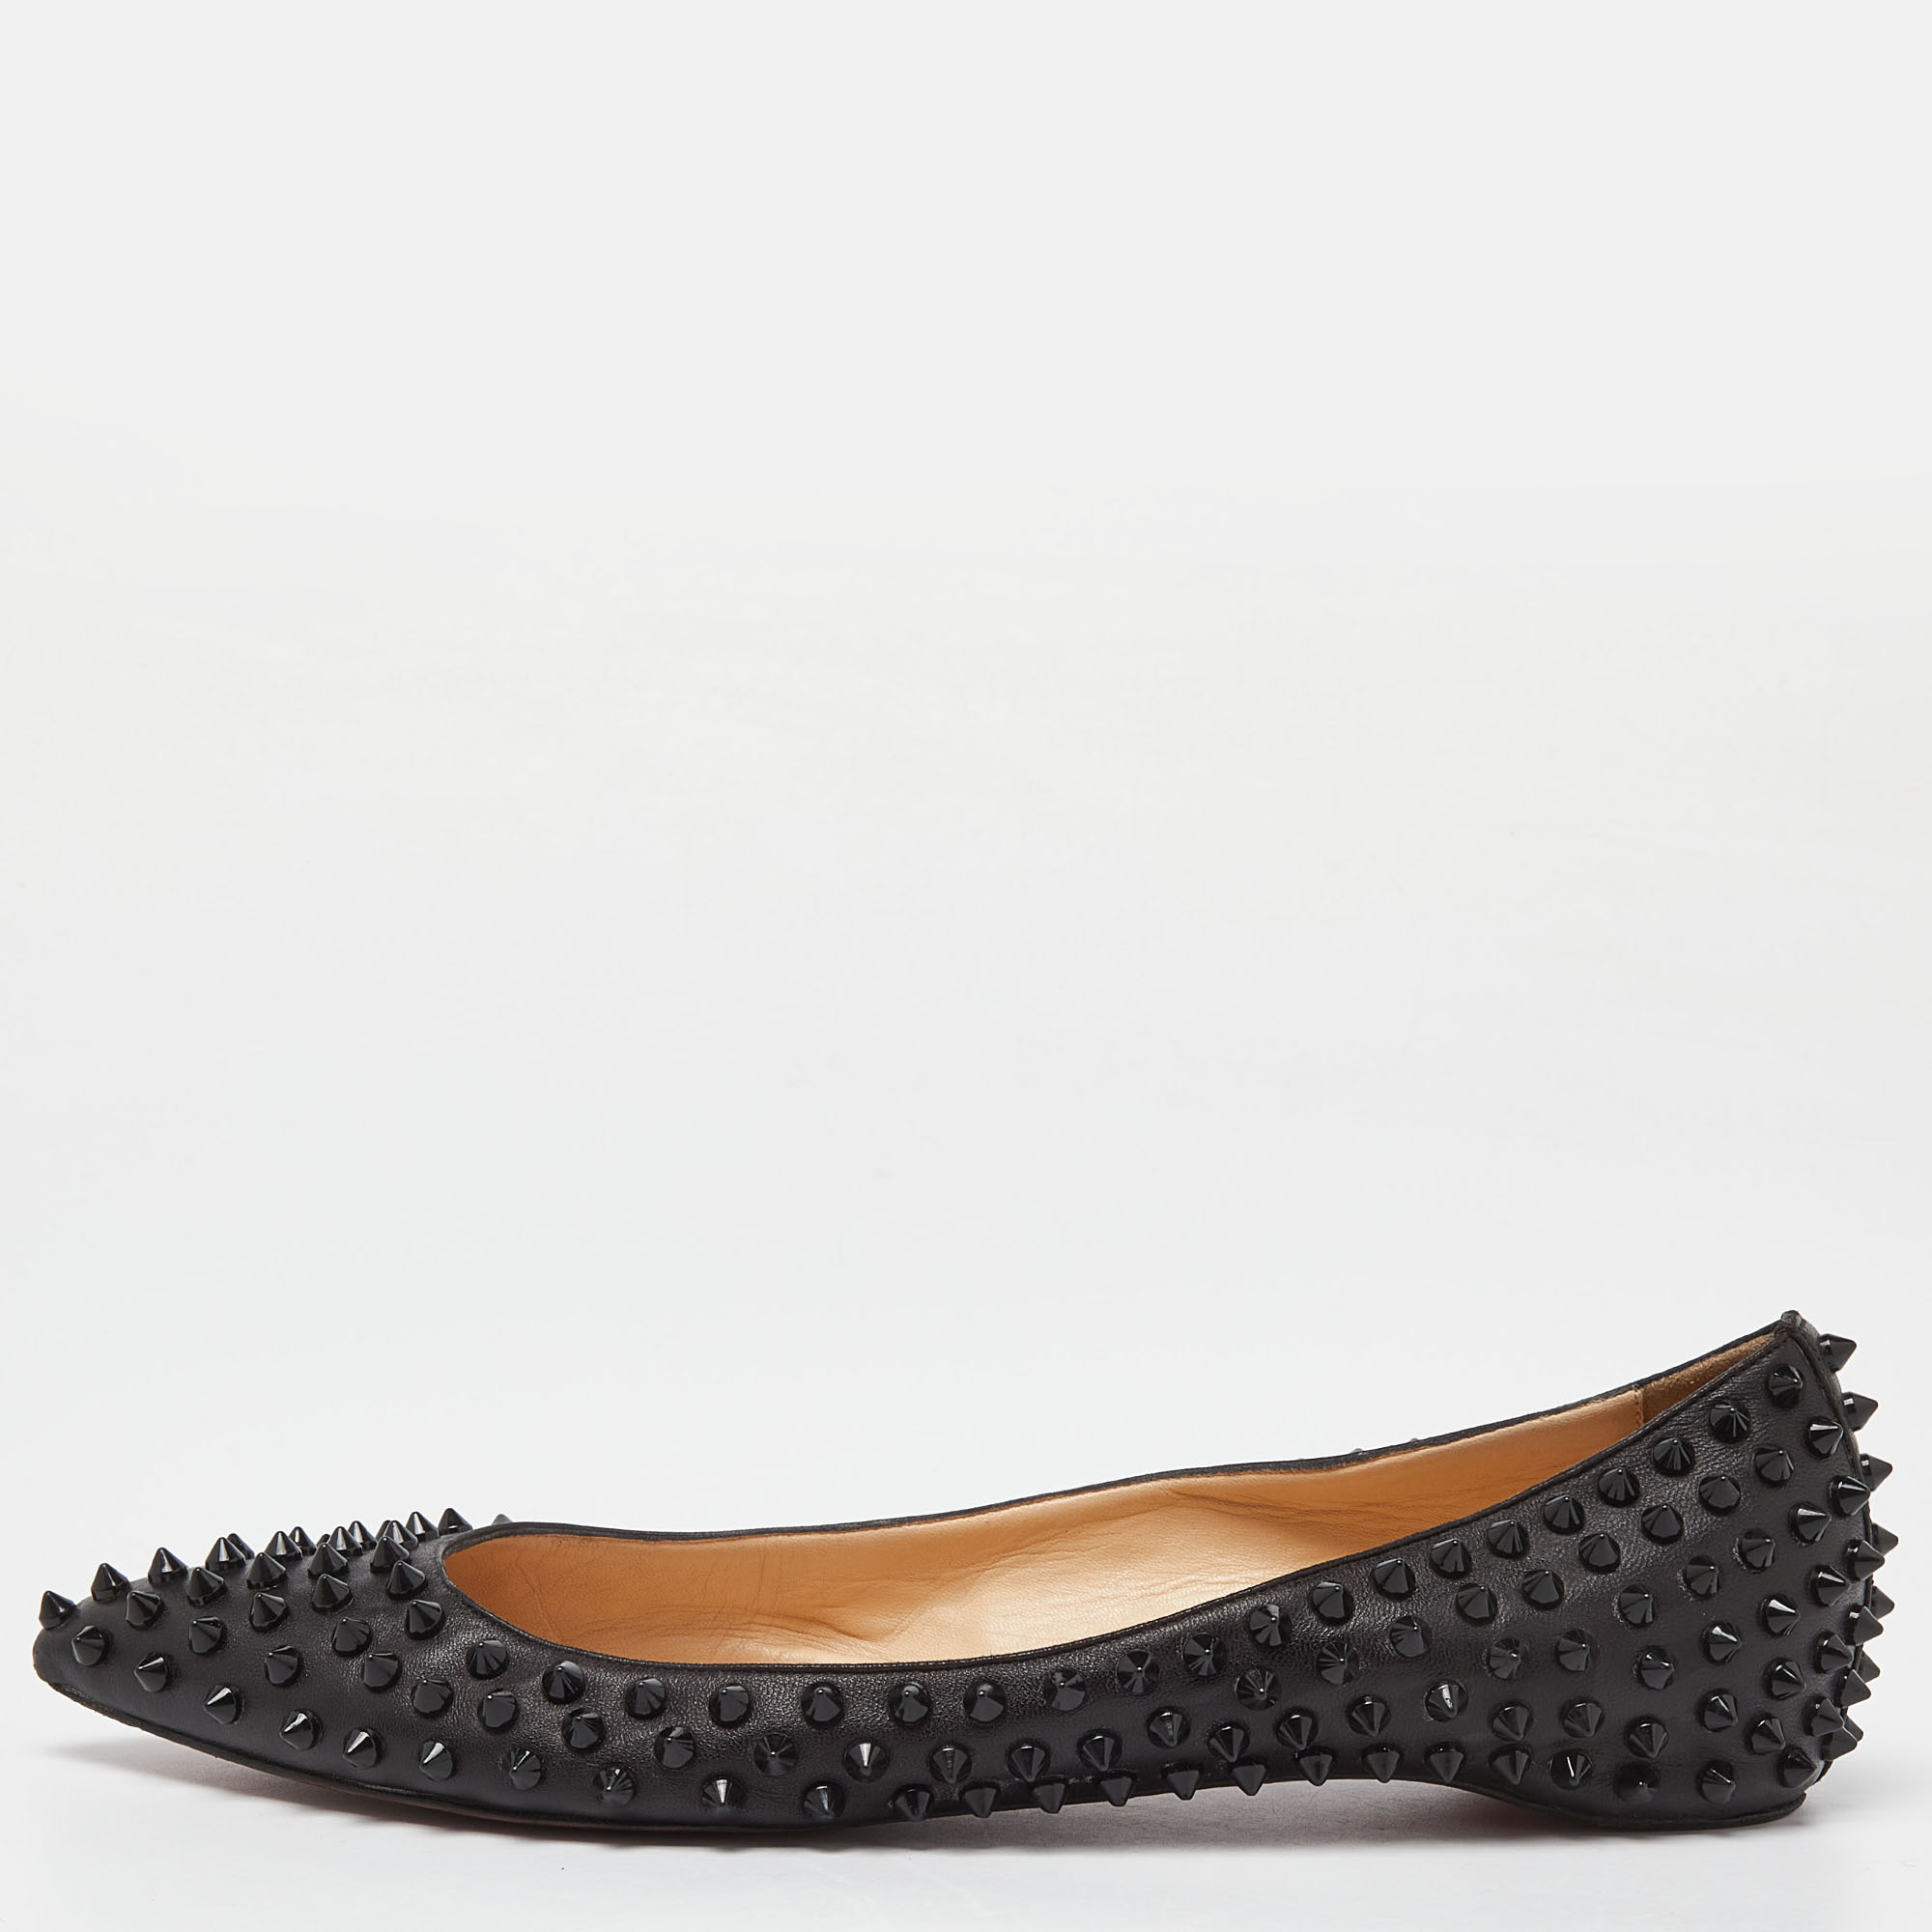 Pre-owned Christian Louboutin Black Leather Pigalle Spikes Ballet Flats Size 41.5